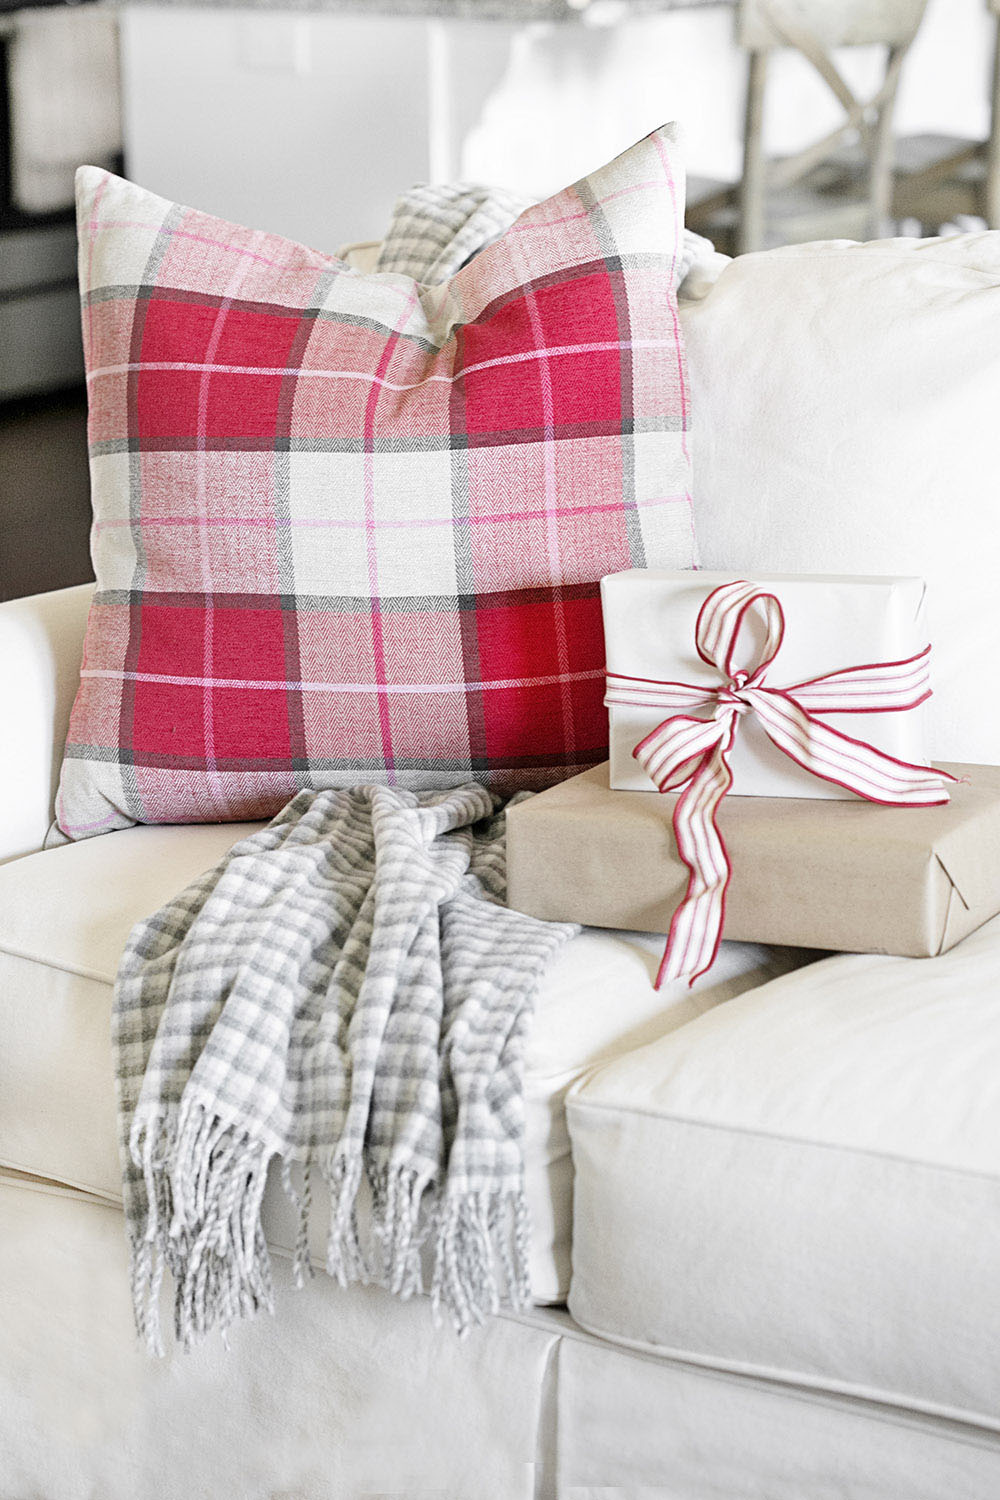 Blanket, boxes and pillow sitting on couch 